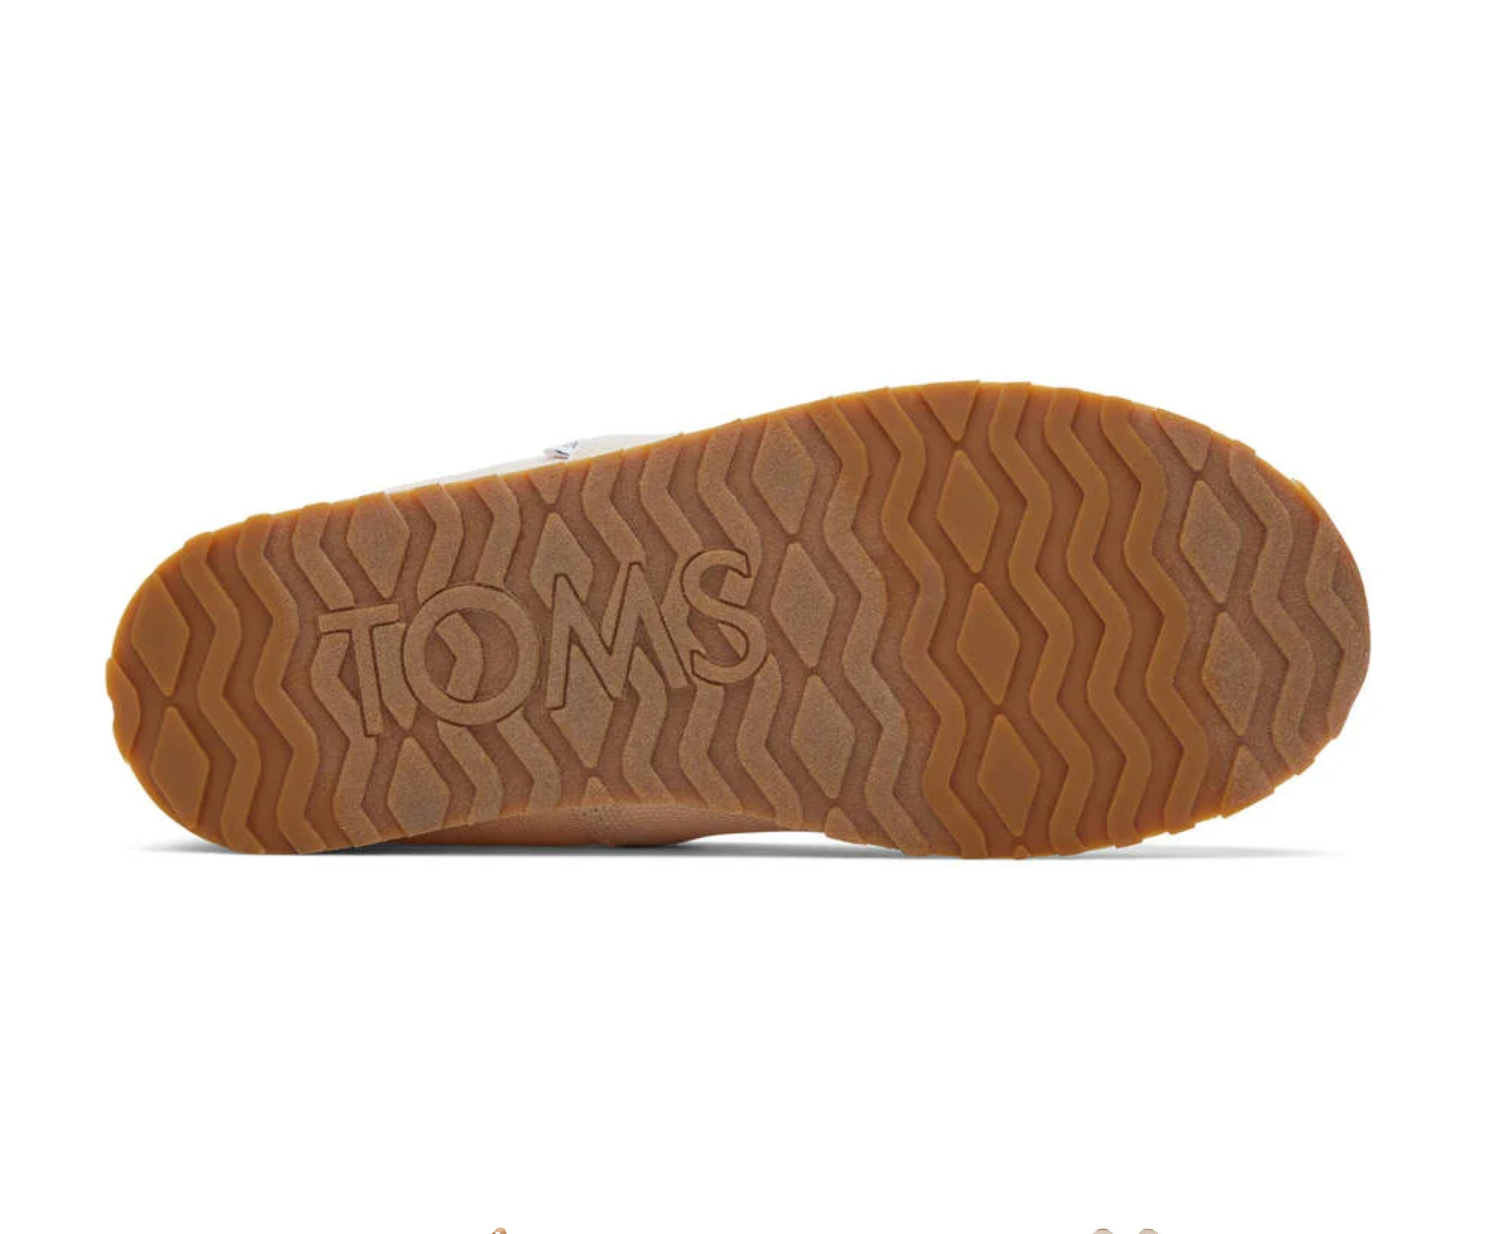 TOMS Resident Heritage Canvas Warm Natural Women Sneakers